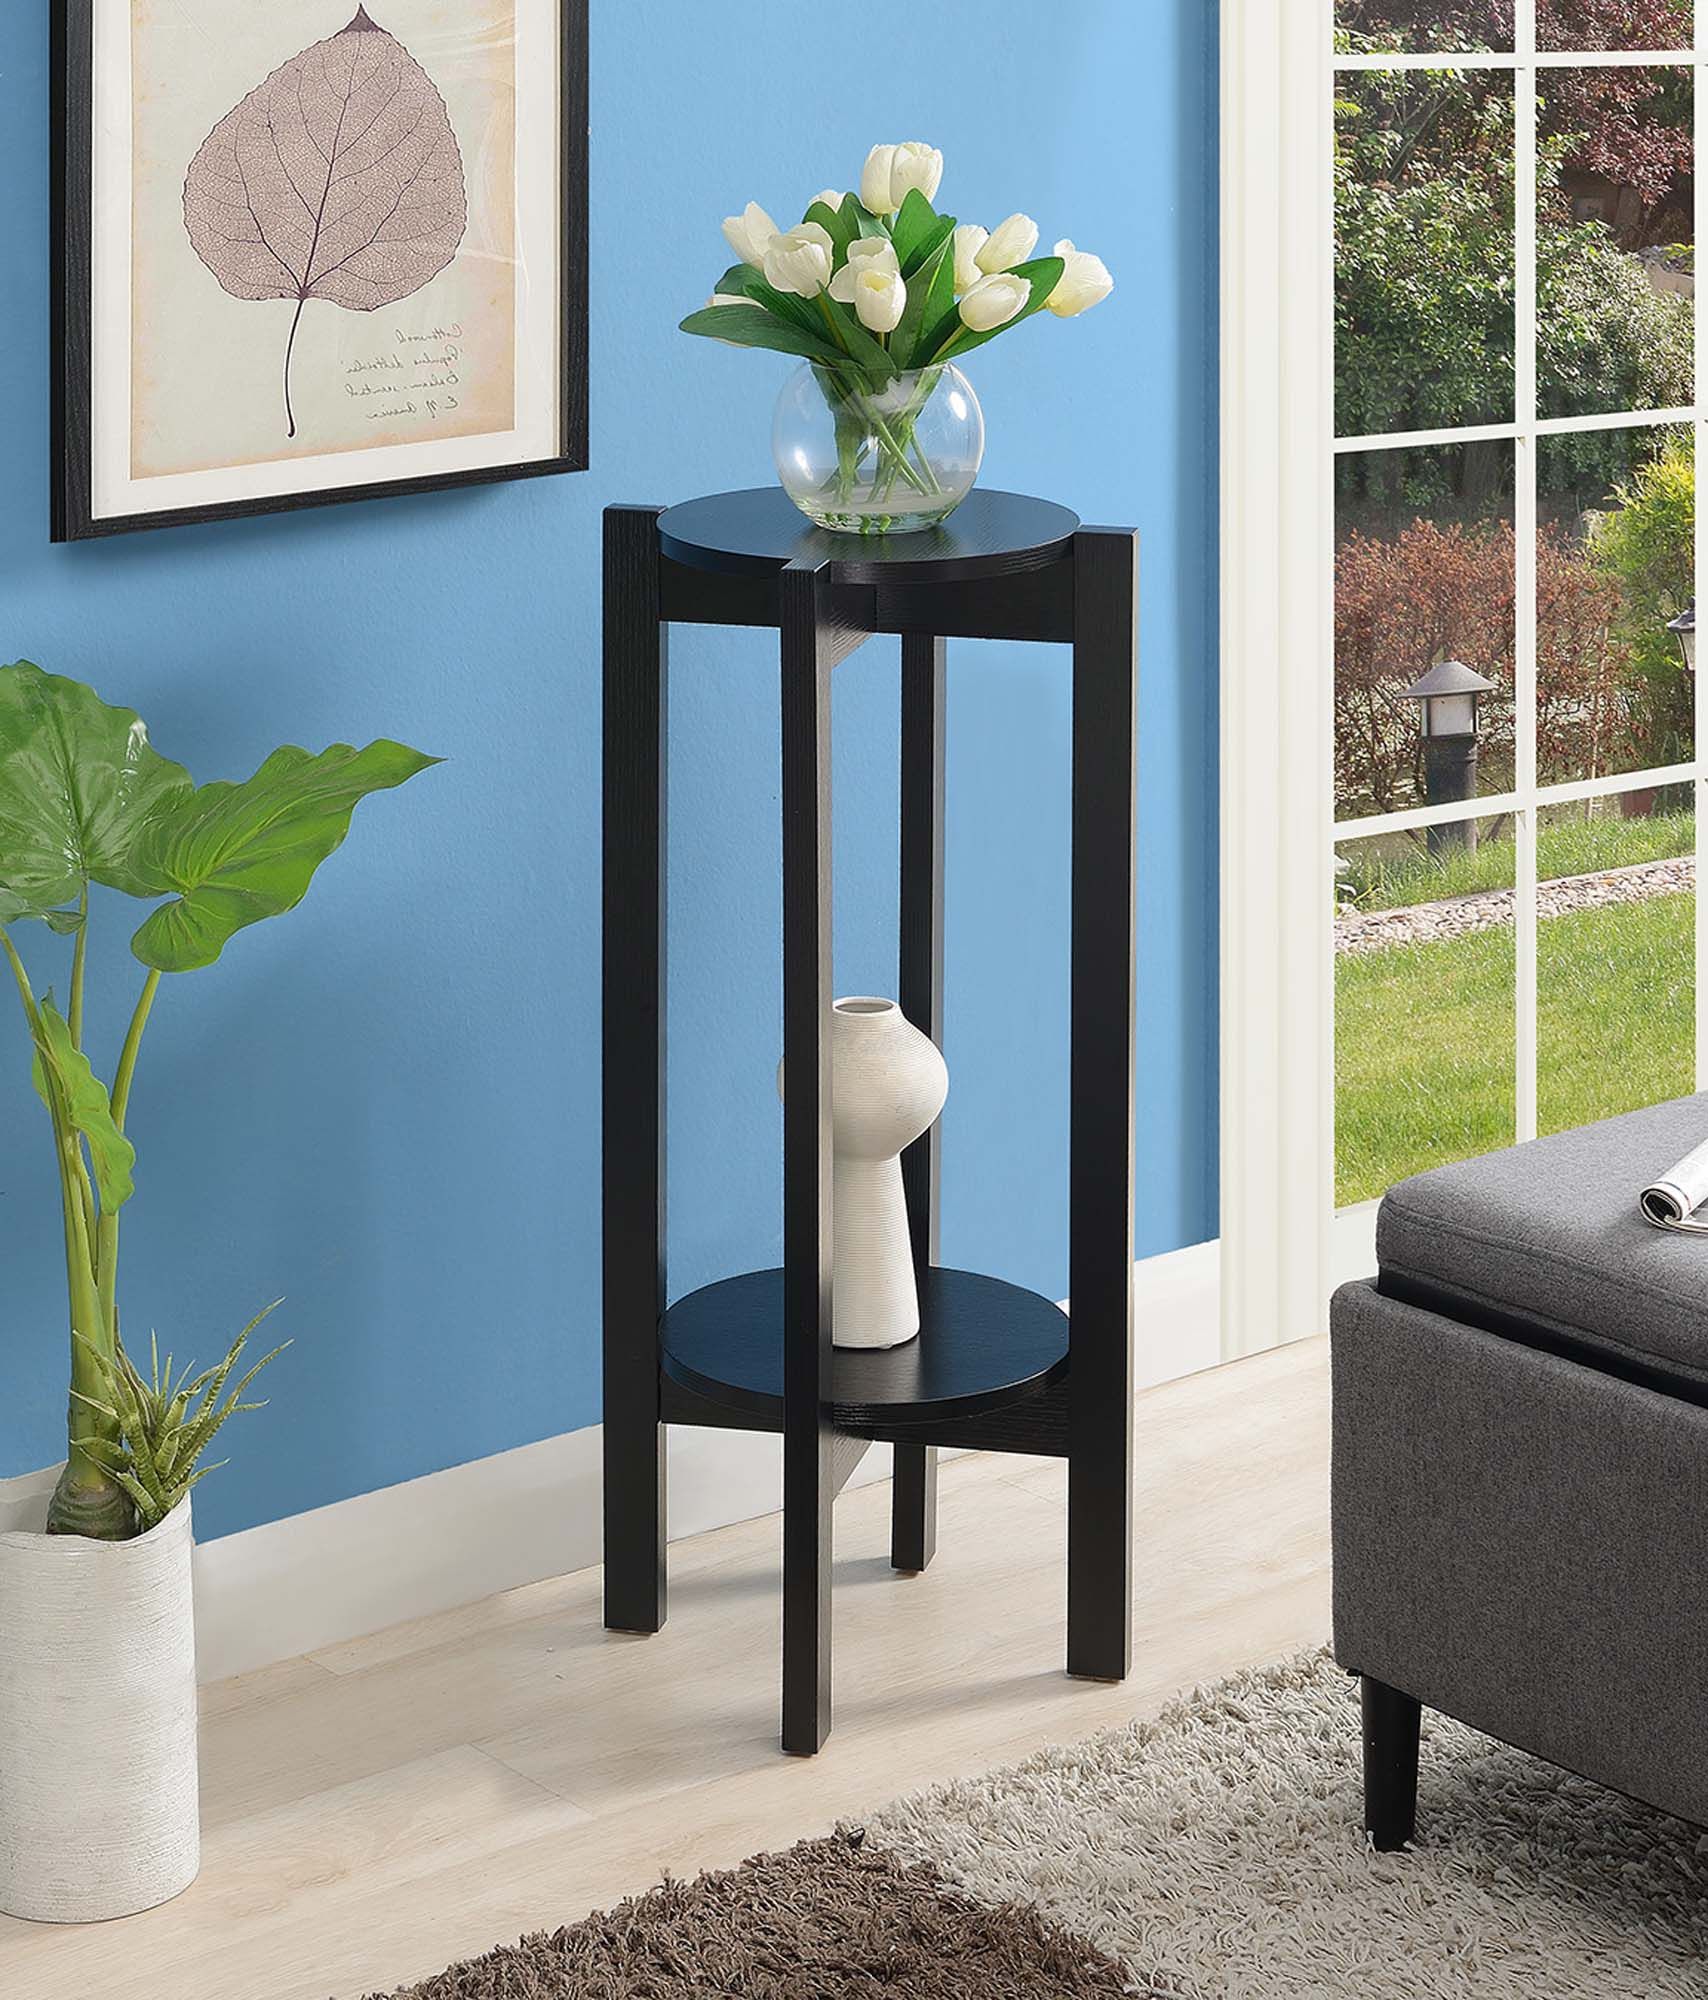 Convenience Concepts Newport Deluxe 2 Tier Plant Stand, Black – Walmart Throughout Deluxe Plant Stands (View 3 of 15)